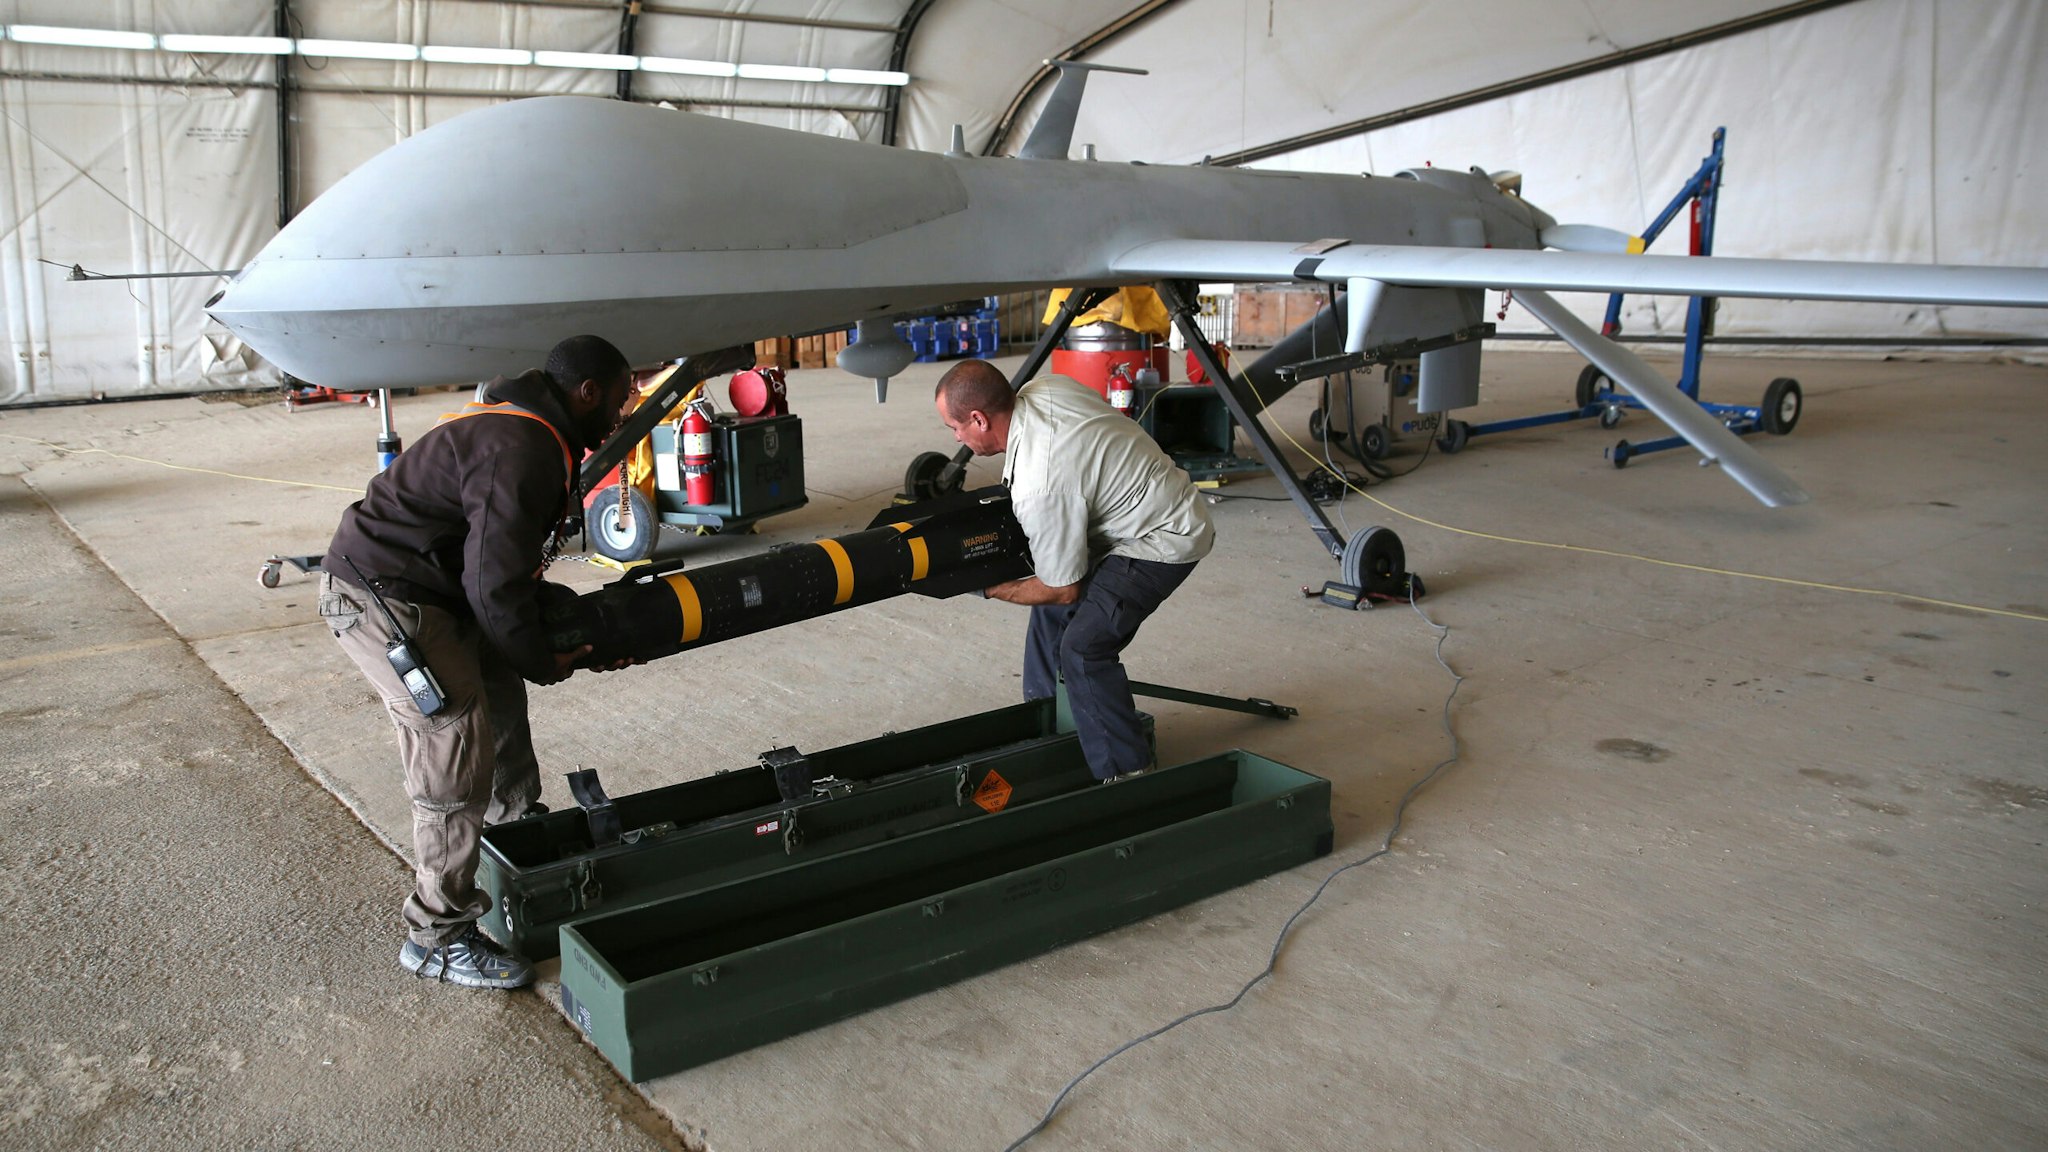 UNSPECIFIED, UNSPECIFIED - JANUARY 07: Contract workers load a Hellfire missile onto a U.S. Air Force MQ-1B Predator unmanned aerial vehicle (UAV), at a secret air base in the Persian Gulf region on January 7, 2016. The U.S. military and coalition forces use the base, located in an undisclosed location, to launch drone airstrikes against ISIL in Iraq and Syria, as well as to distribute cargo and transport troops supporting Operation Inherent Resolve. The Predators at the base are operated and maintained by the 46th Expeditionary Reconnaissance Squadron, currently attached to the 386th Air Expeditionary Wing.